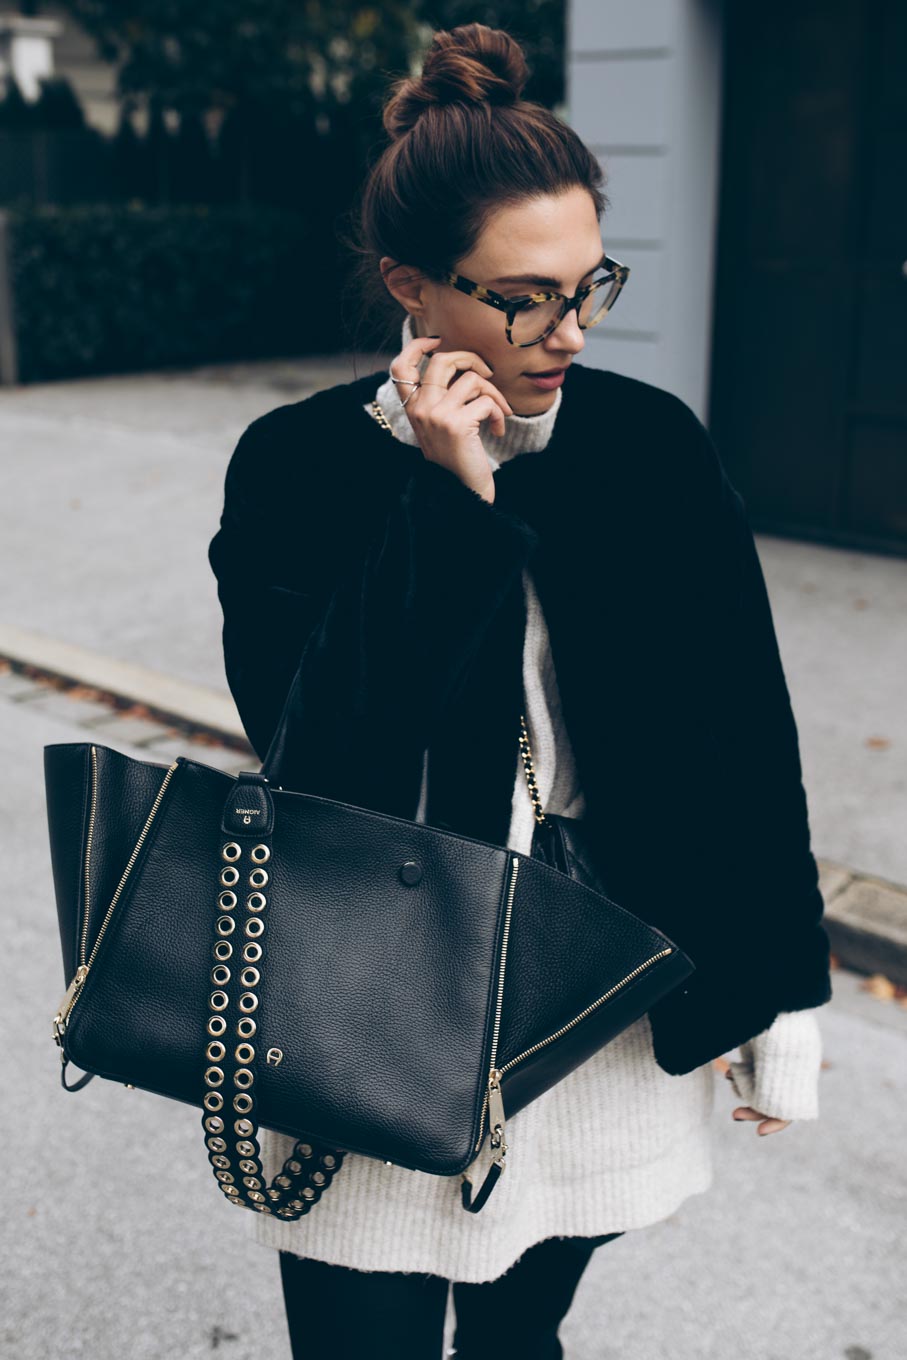 You rock my life: Zara Faux Fur Jacket, Oversized Jumper, Zara Boots, VIU The Beauty glasses, Aigner Lea Bag, Chanel Walltet on chain | Outfit For Fall 